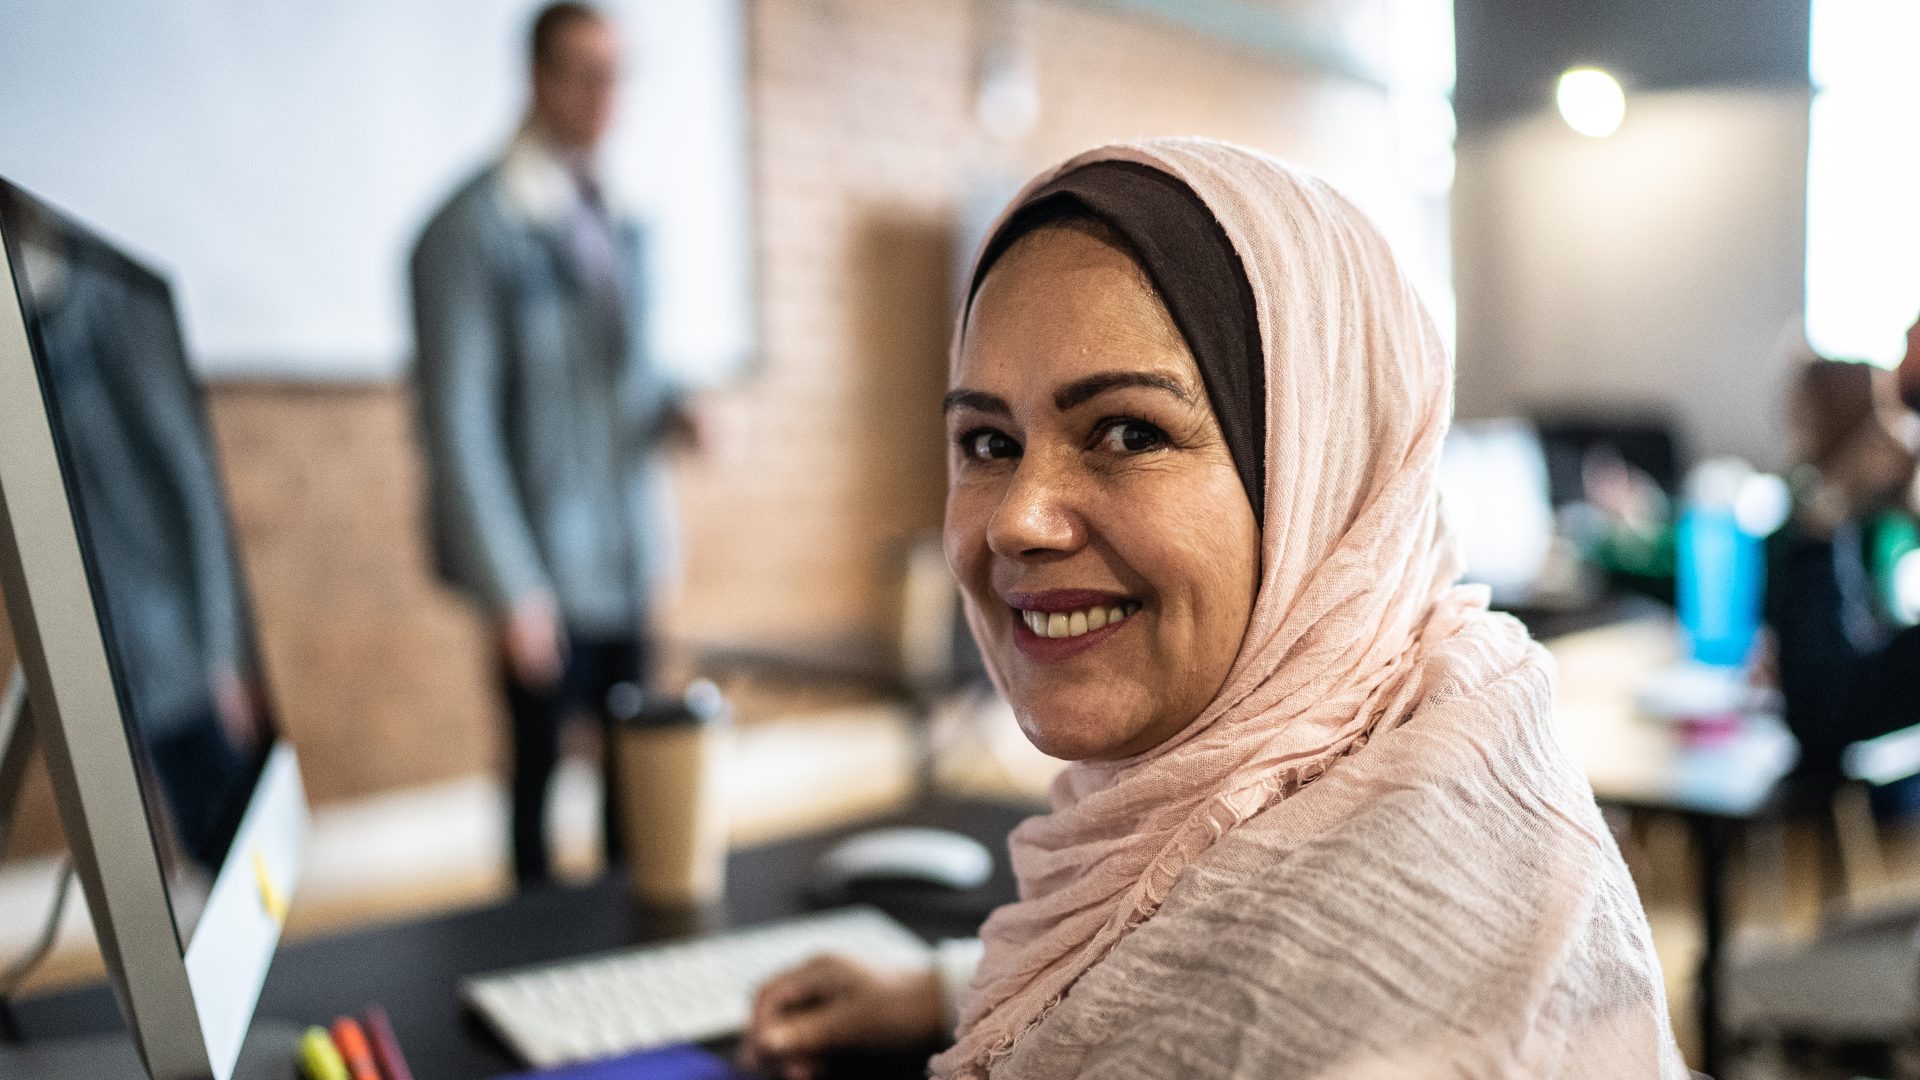 Woman in pink hijab sitting at classroom desk looking over shoulder and smiling